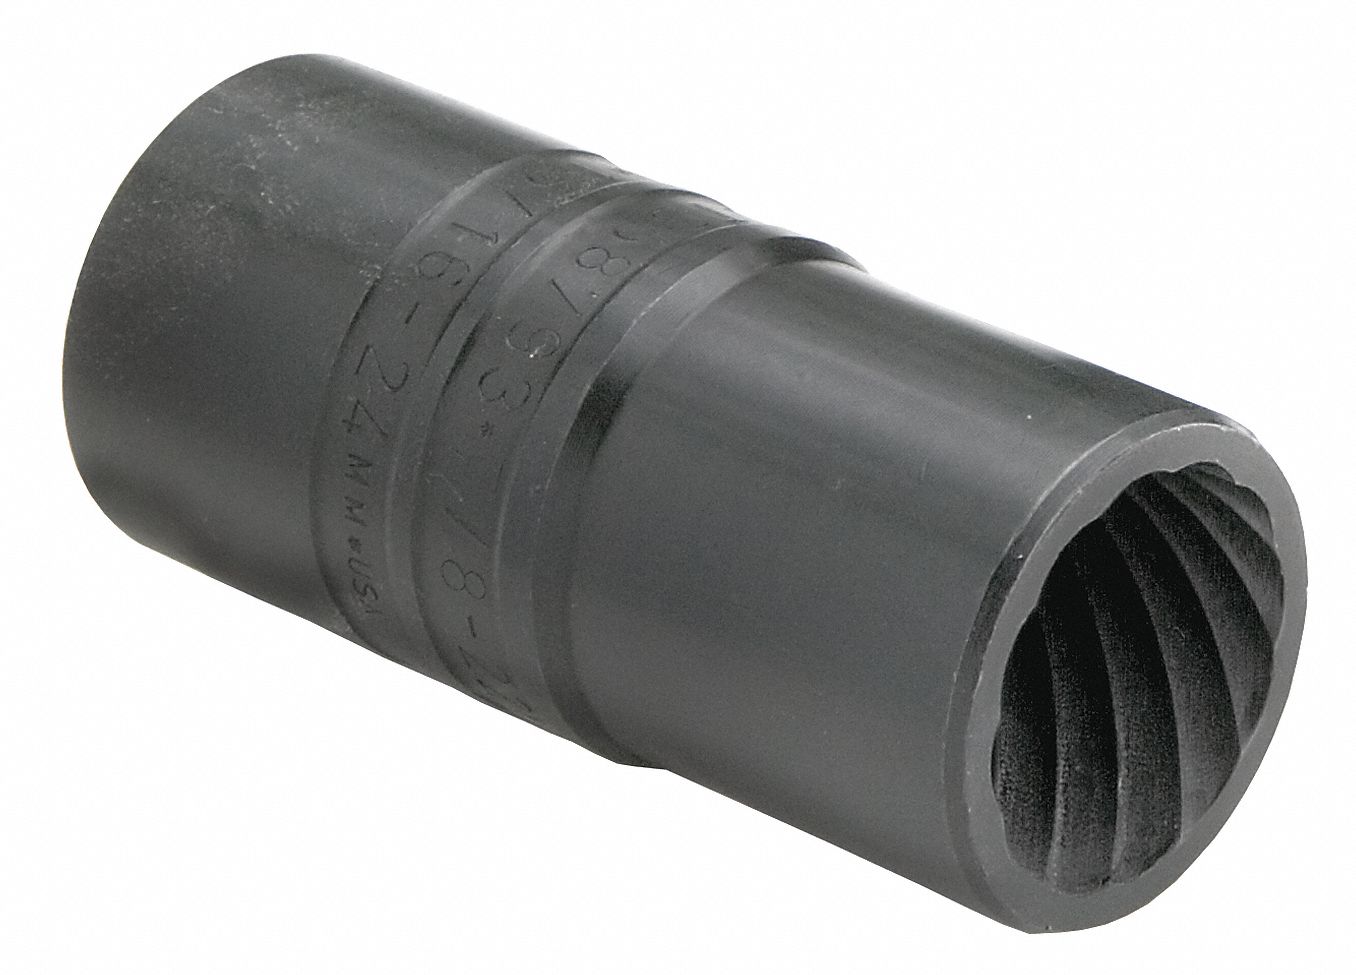 Bolt Extraction Socket,  3/8 in Drive Size,  12 mm Socket Size,  Bolt Extractor,  Alloy Steel